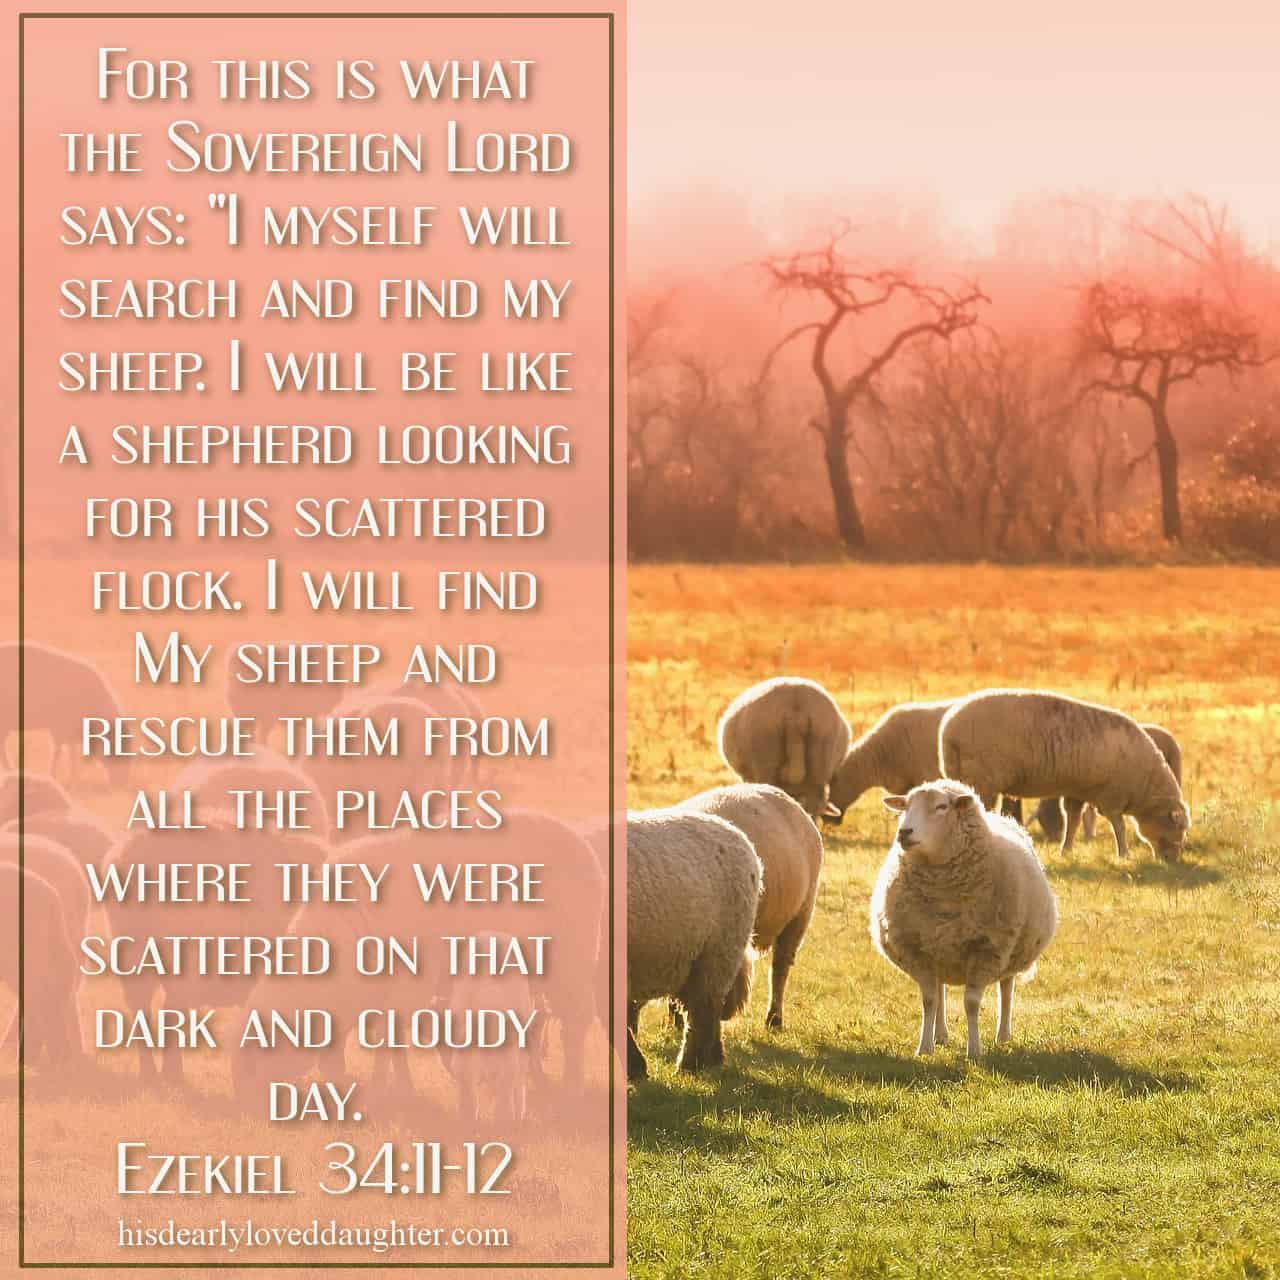 For this is what the Sovereign Lord says: "I will search and find my sheep. I will be like a shepherd looking for his scattered flock. I will find My sheep and rescue them from the places where they were scattered on that dark and cloudy day." Ezekiel 34:11-12